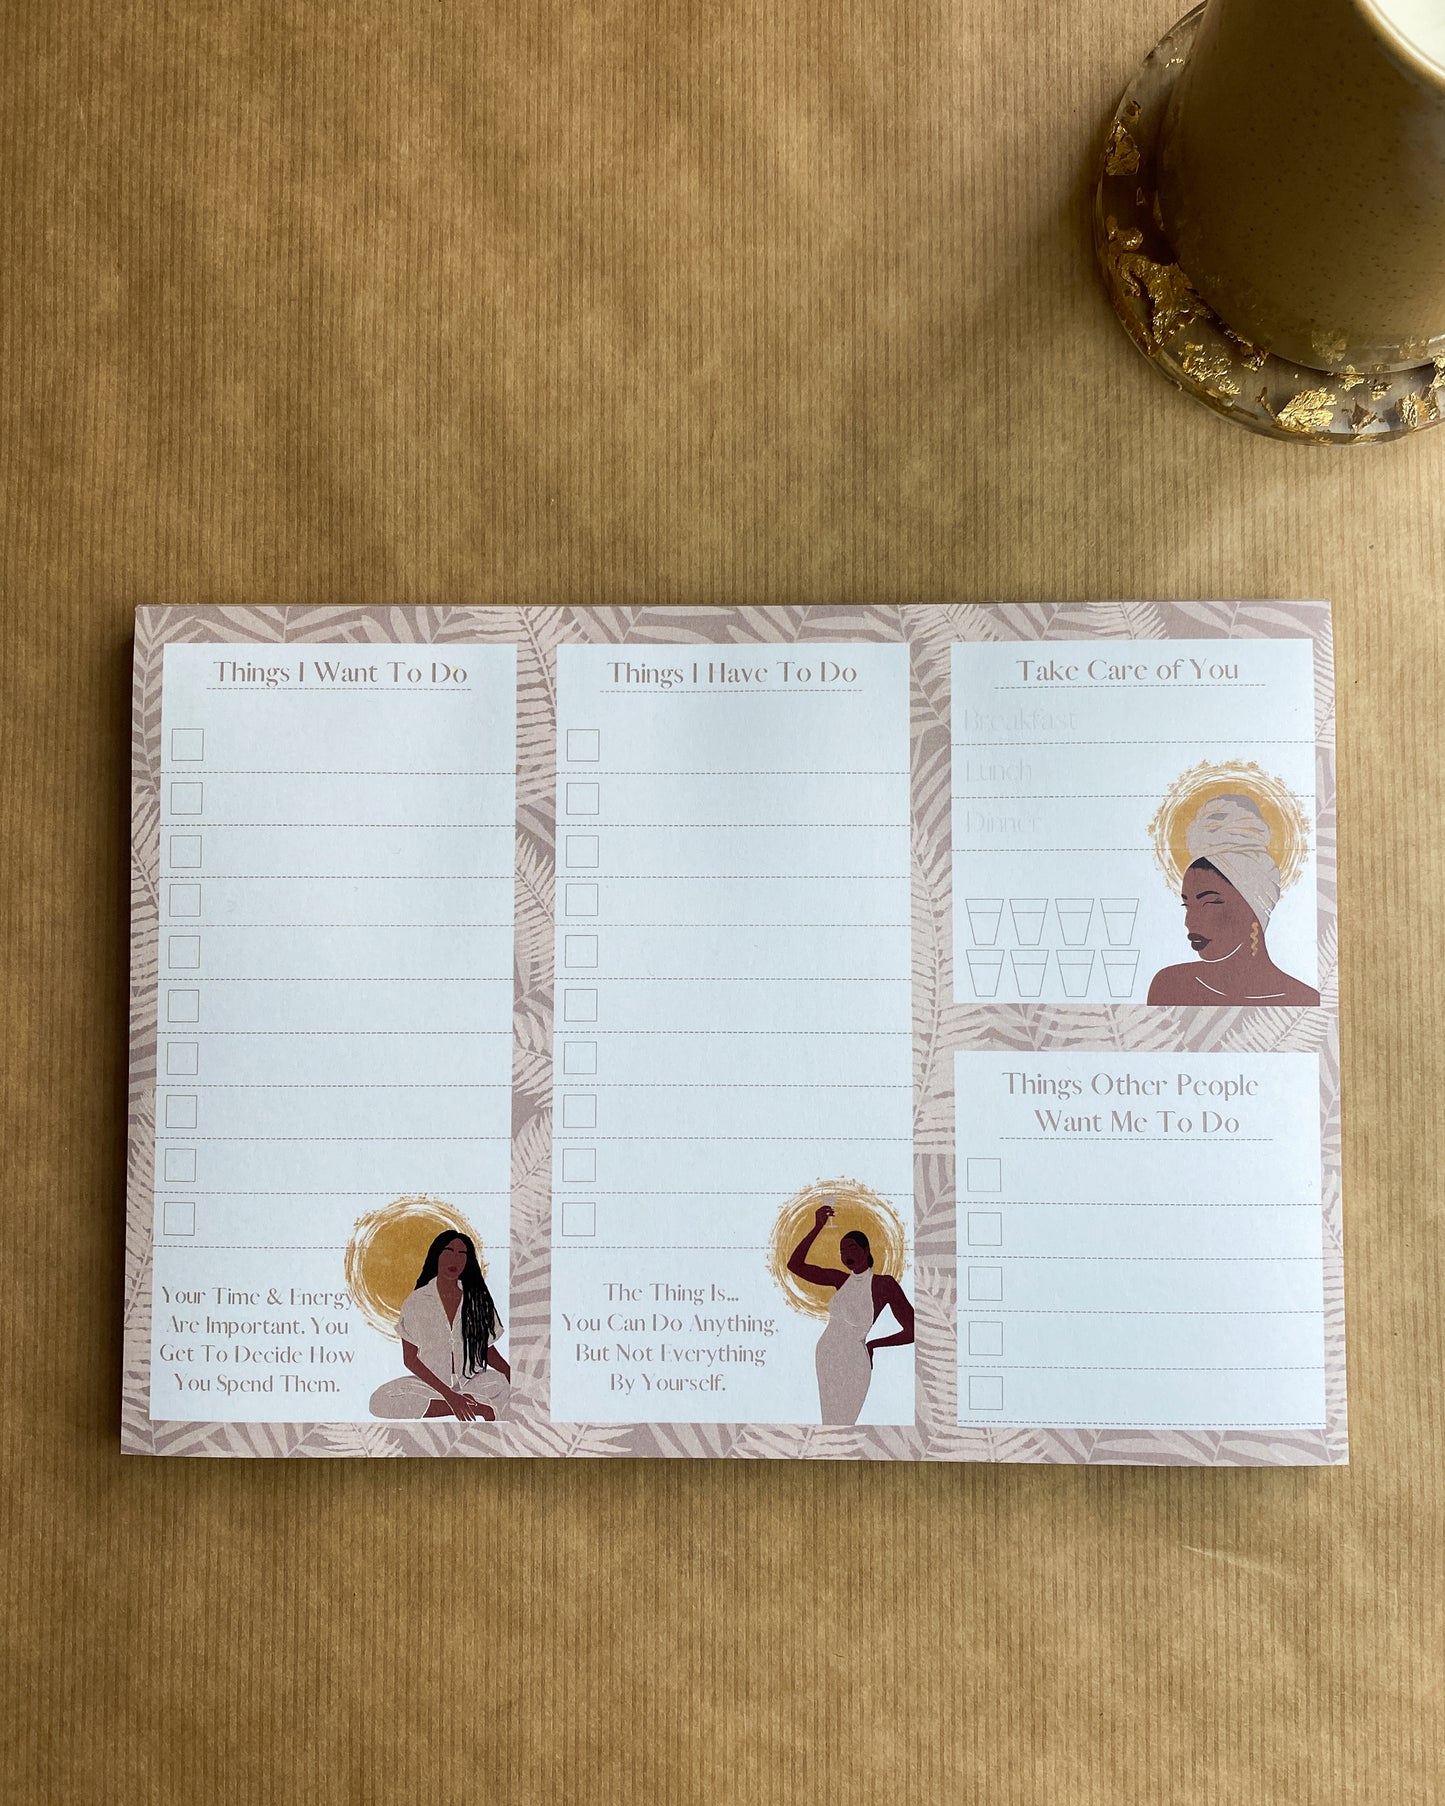 His & Hers Matching Set - Daily To Do List / Planner / Tracker A5 Notepad, Paper Notes, Stationery Gift with 50 Tearable page Mindful